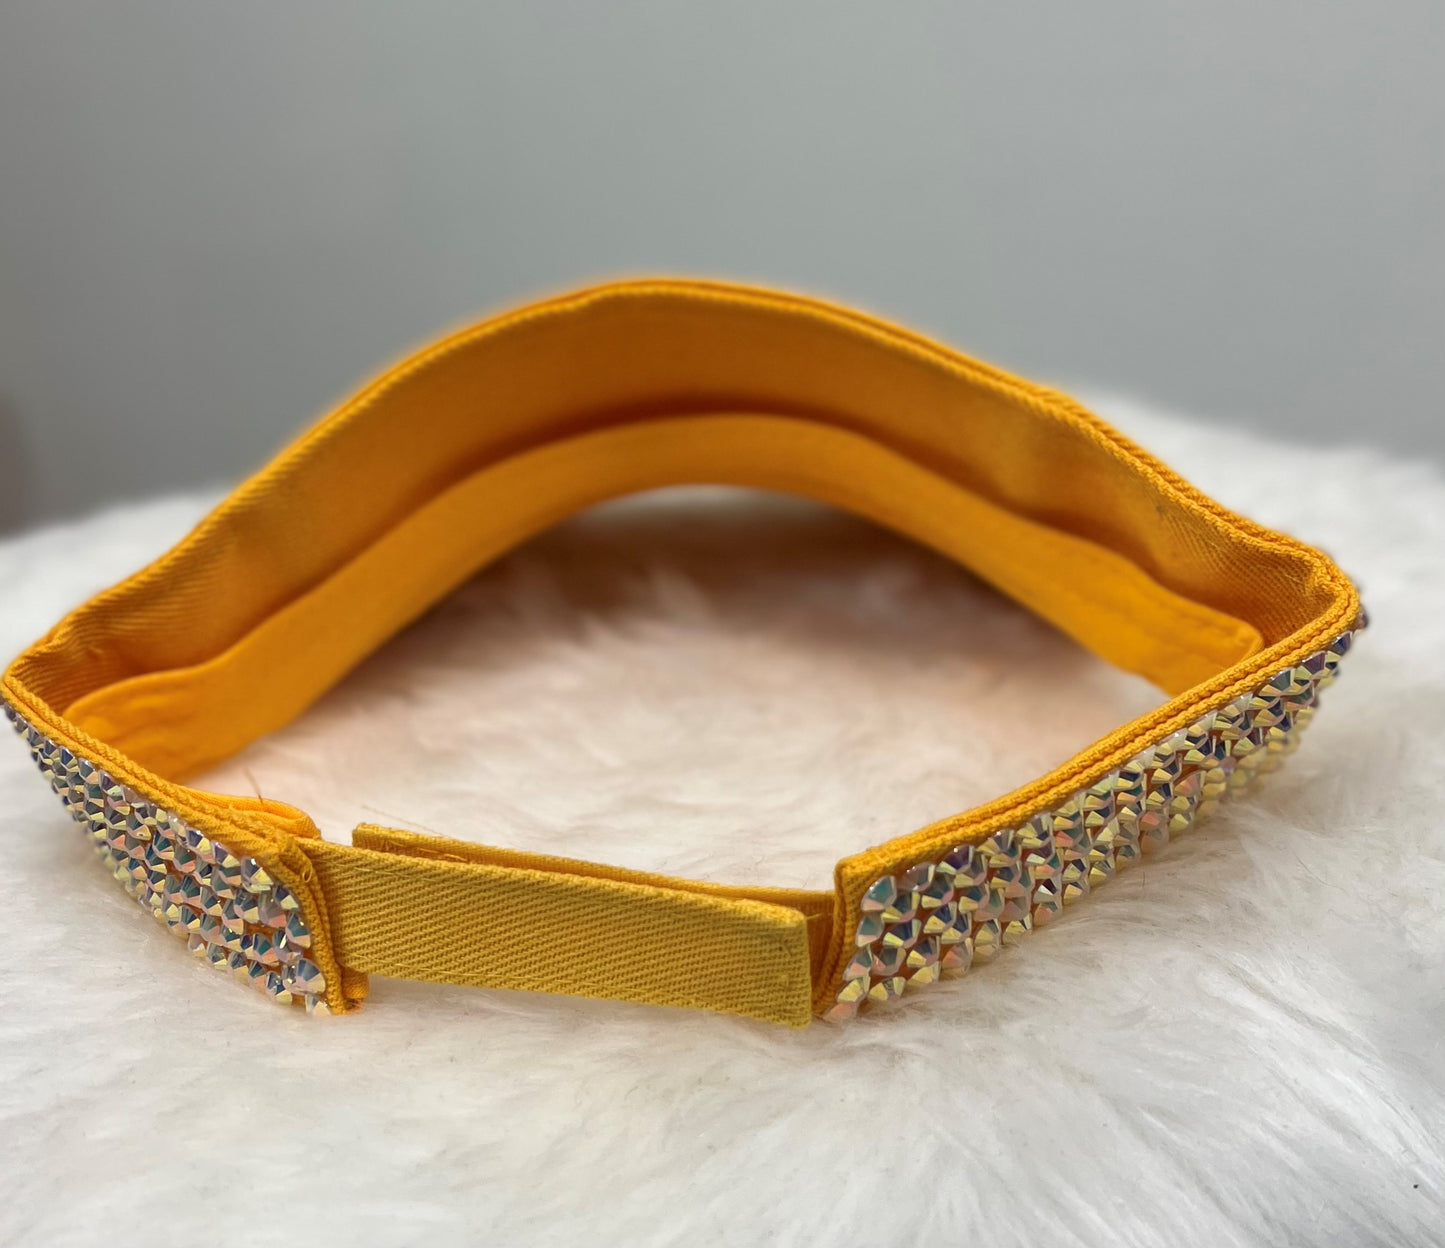 Rhinestone Hat at Pollys Boutique -  Yellow